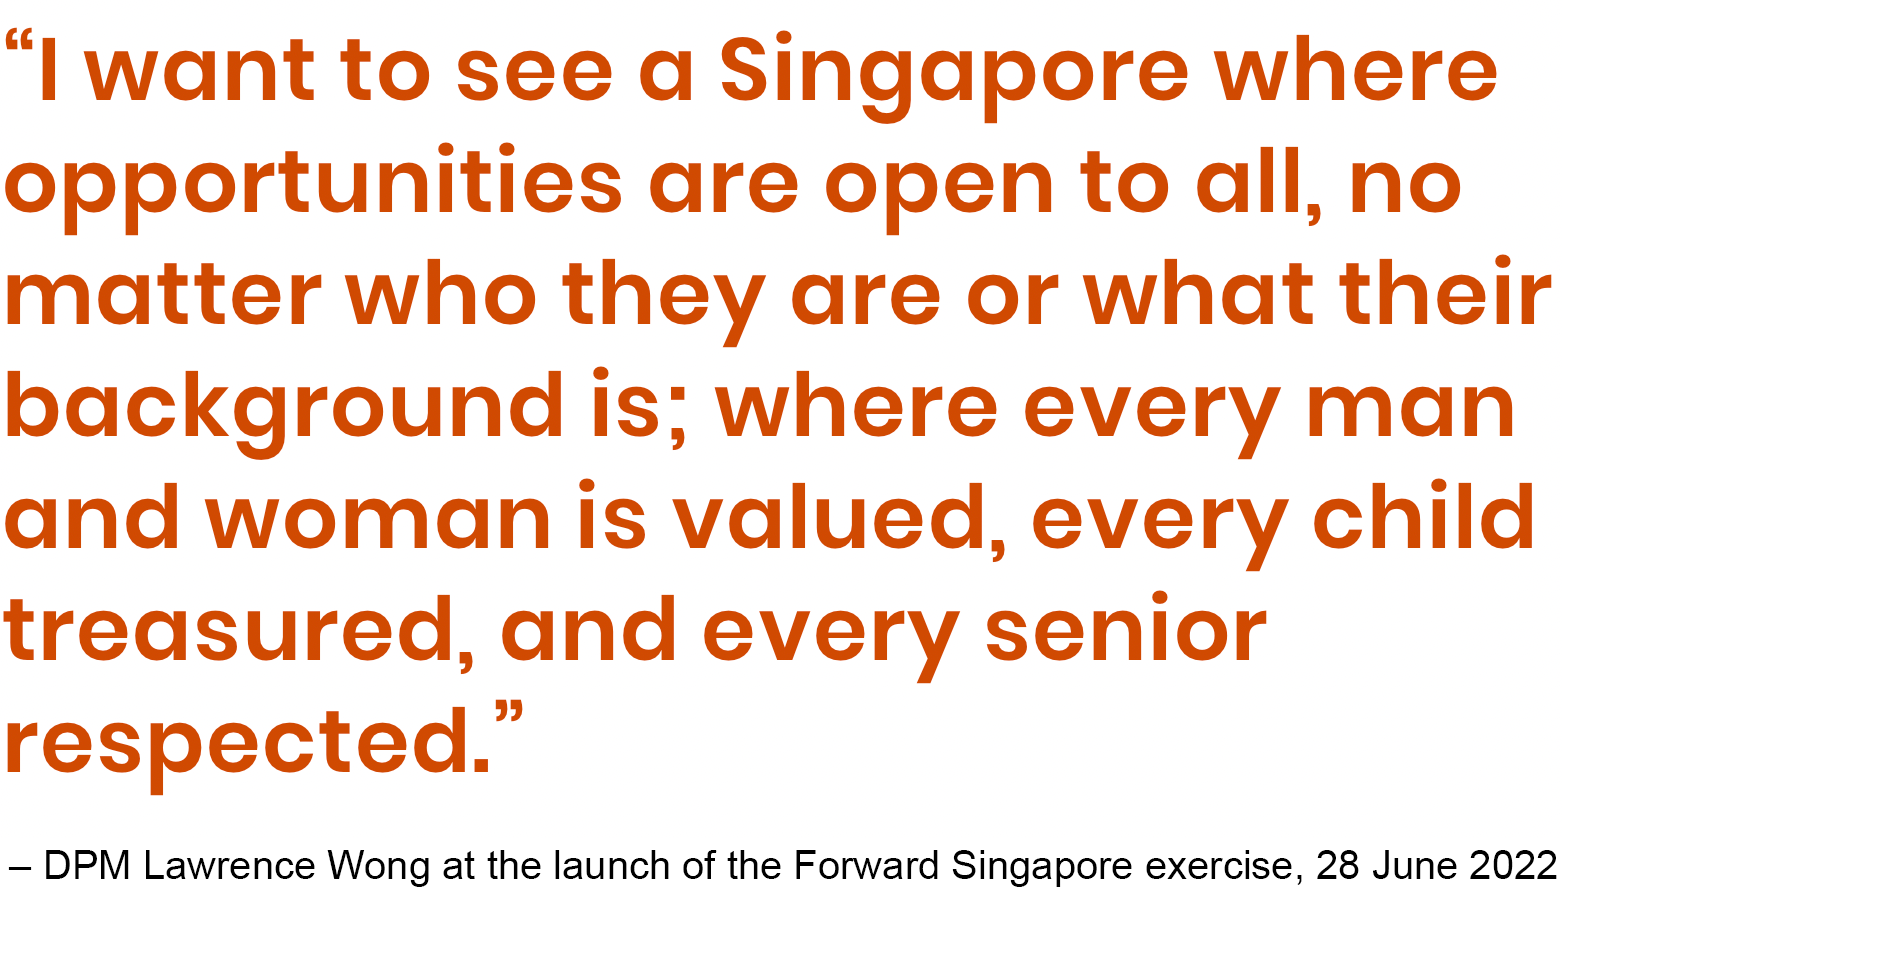 I want to see a Singapore where opportunities are open to all, no matter who they are or what their background is; where every man and woman is valued, every child treasured, and every senior respected.”